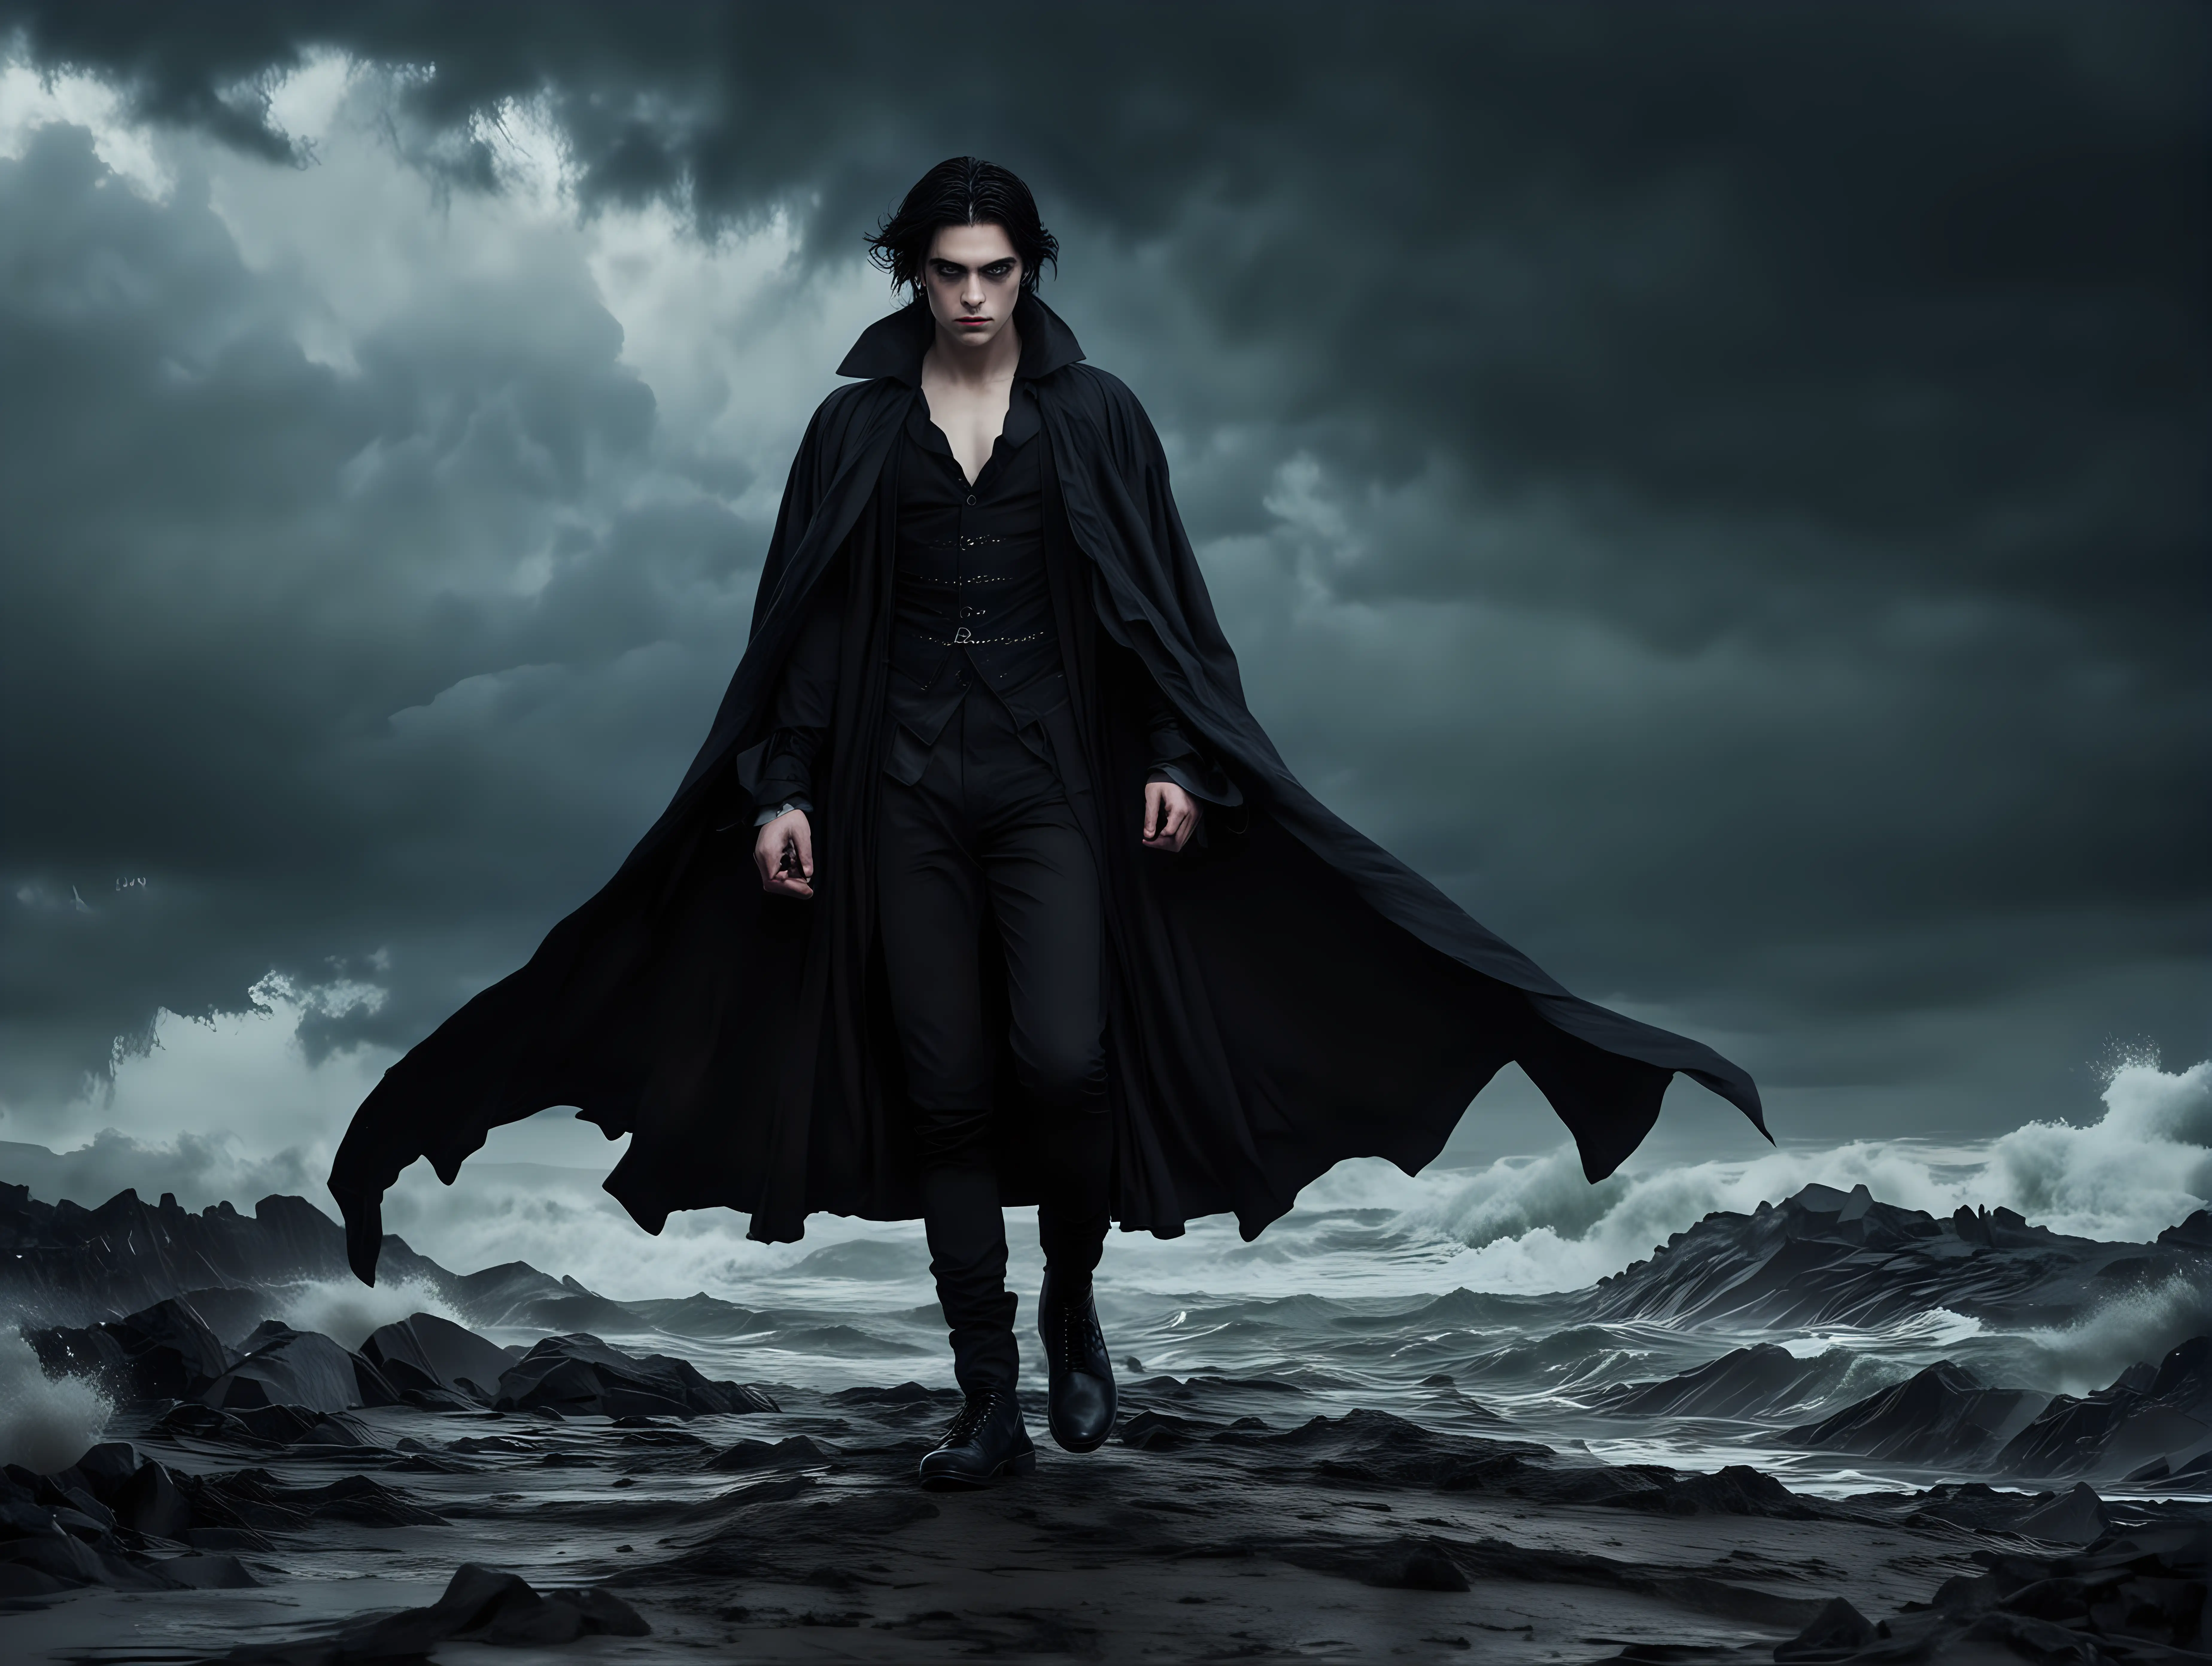 Young-Vampire-in-Black-Cloak-and-Shoes-Blue-Eyes-Storm-Background